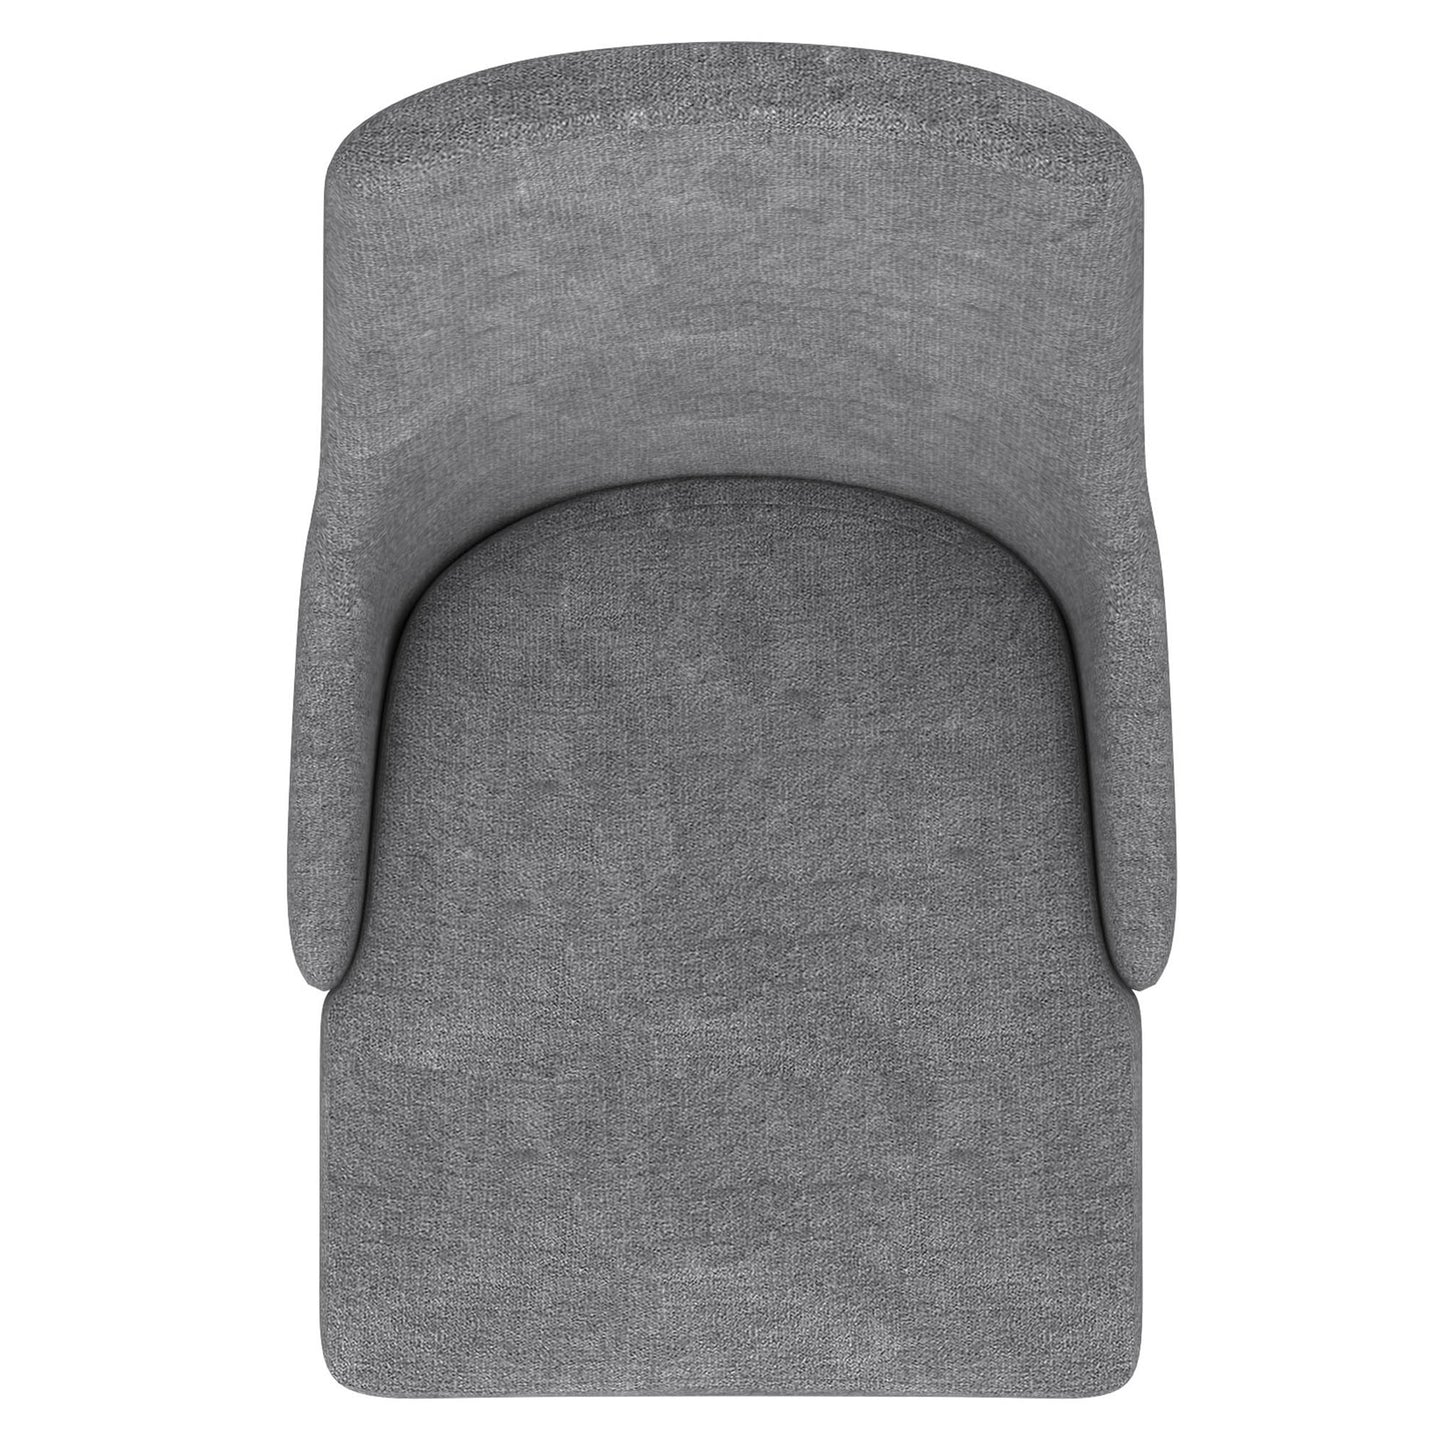 (CORA GREY- 2 PACK)- FABRIC- DINING CHAIR